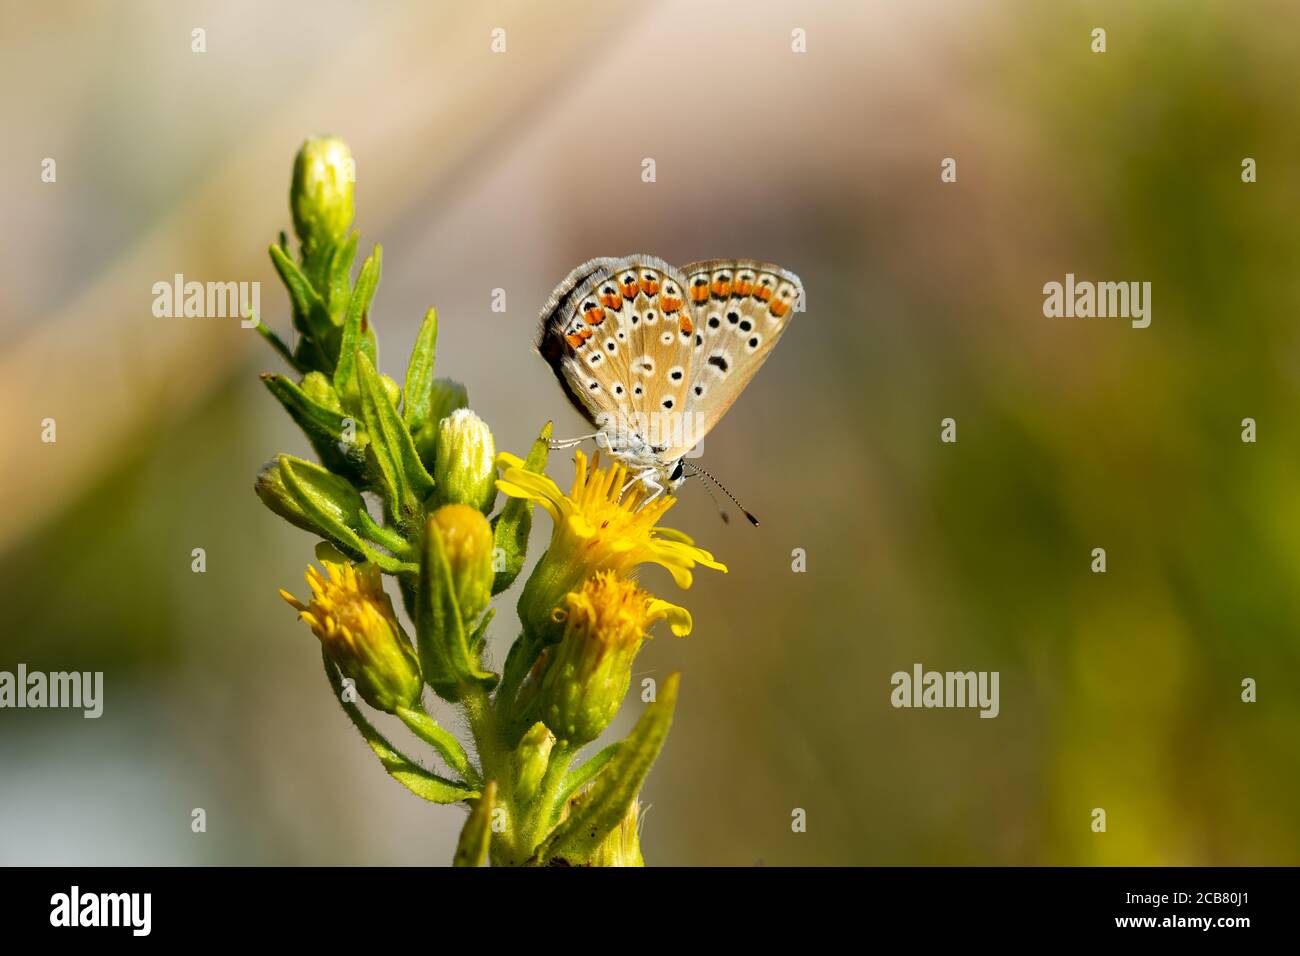 Small butterfly of the family Lycaenidae perched on a yellow flower Stock Photo